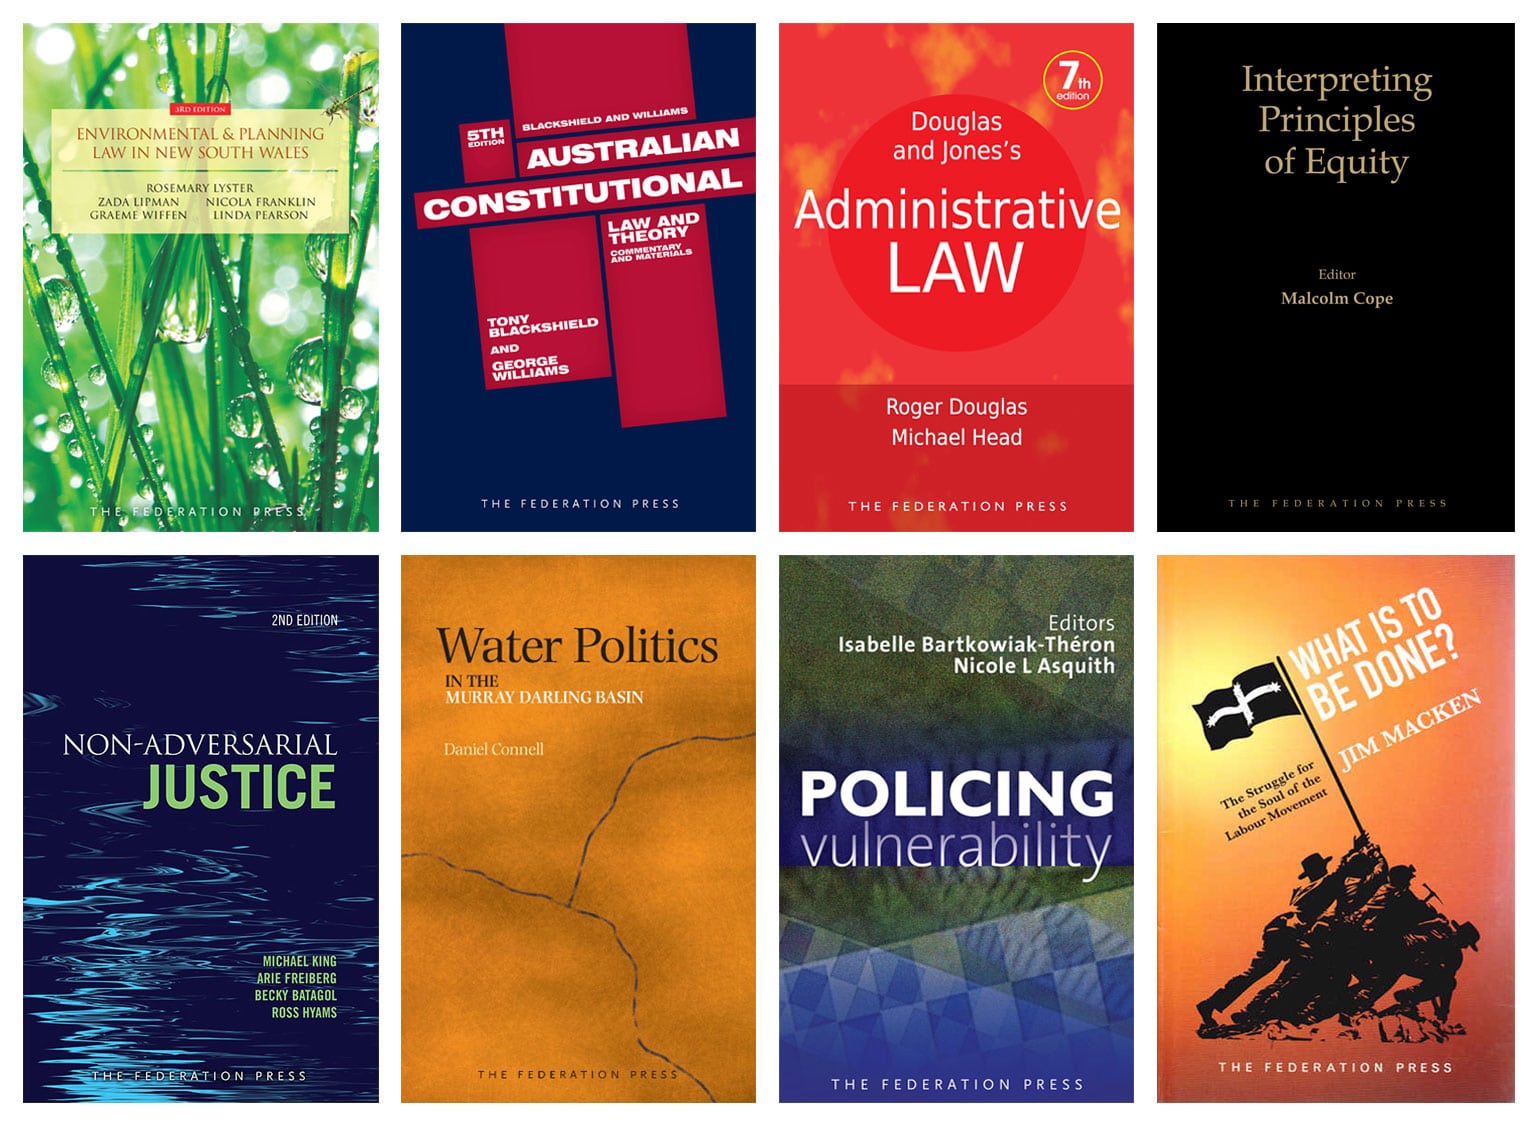 Covers of books published by The Federation Press, including titles on law, justice, and politics.